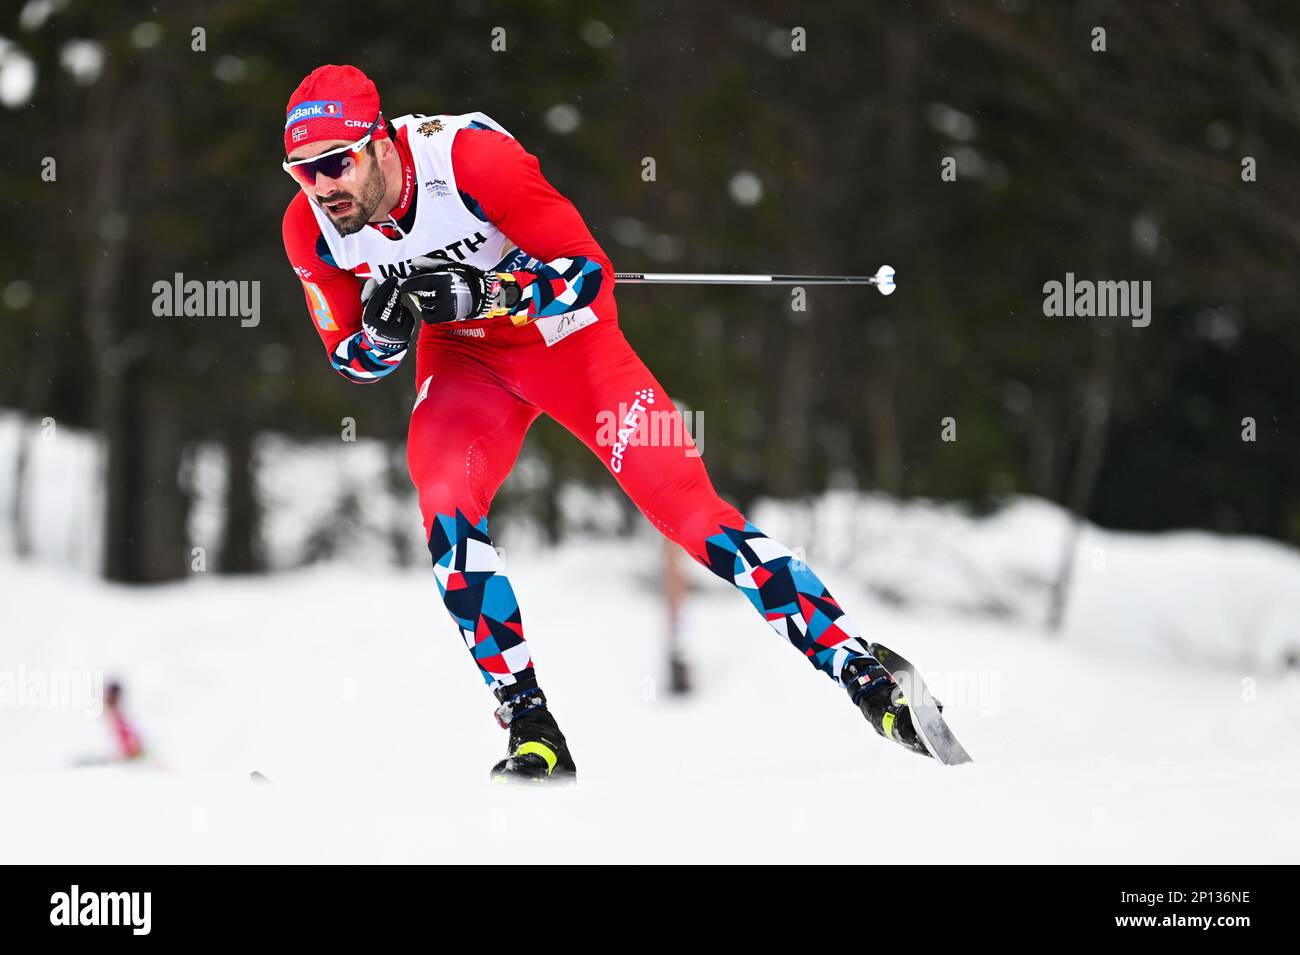 Planica, Slovenia. 28th Feb, 2023. Norway's Hans Christer Holund on the first leg of the men’s 4 by 10-K relay at the 2023 FIS World Nordic Ski Championships in Planica, Slovenia. Norway won the event. Credit: John Lazenby/Alamy Live News Stock Photo